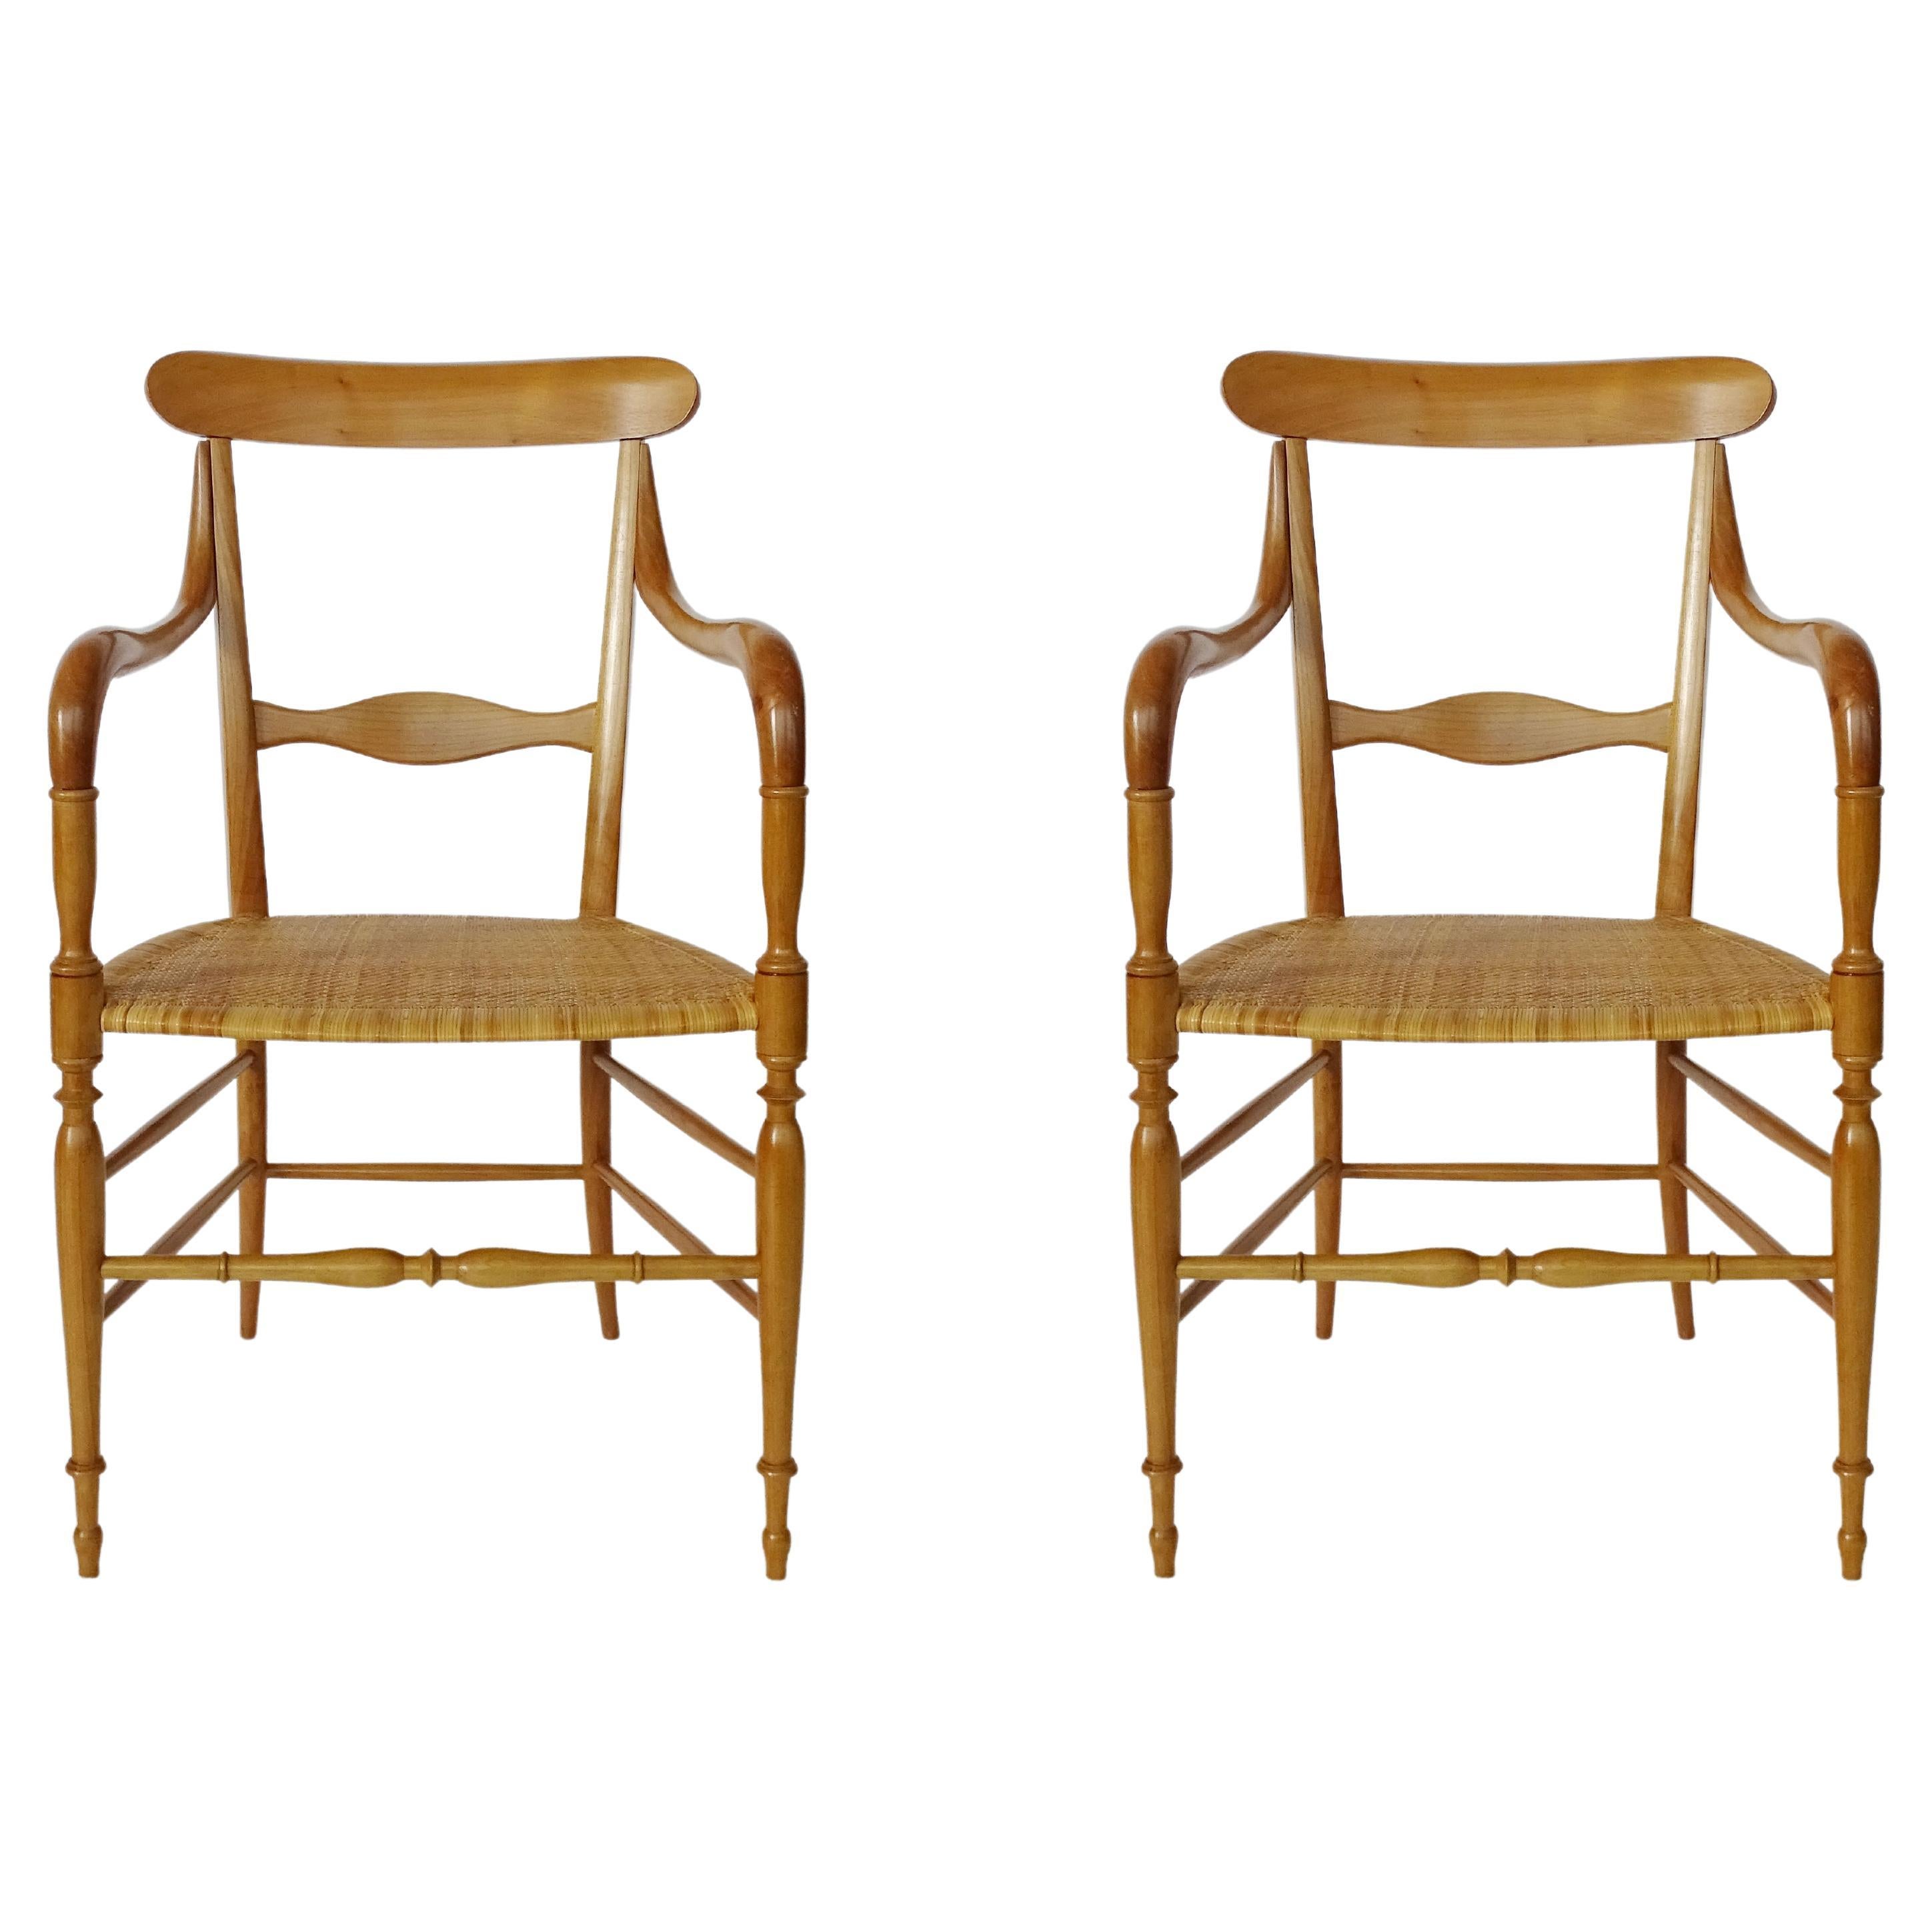 Pair of Chiavari Armchairs in Beechwood and Caned Seat, Italy, 1960s For Sale